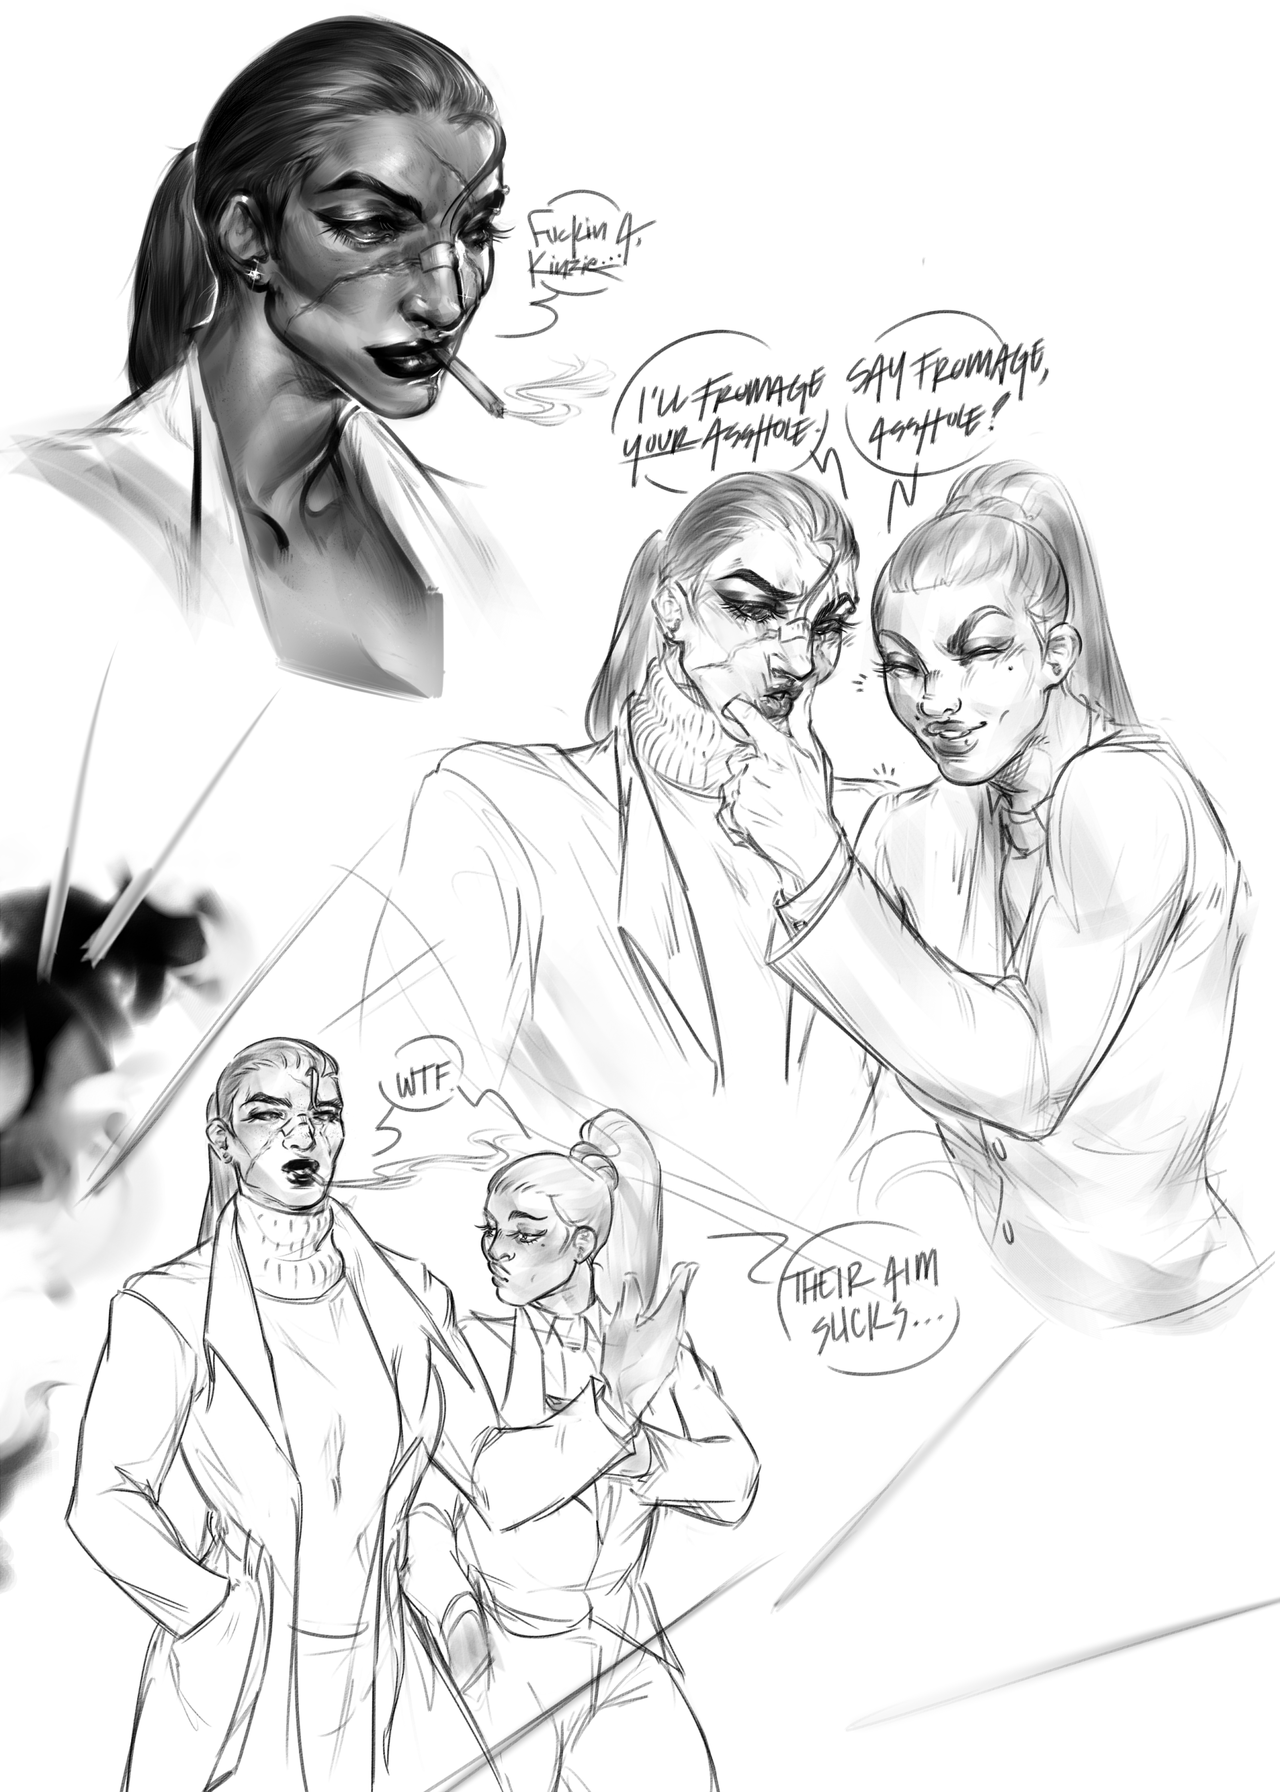 officialamelielacroix: My gf and I played SR4 and that was.. chaotic.The gal I made: